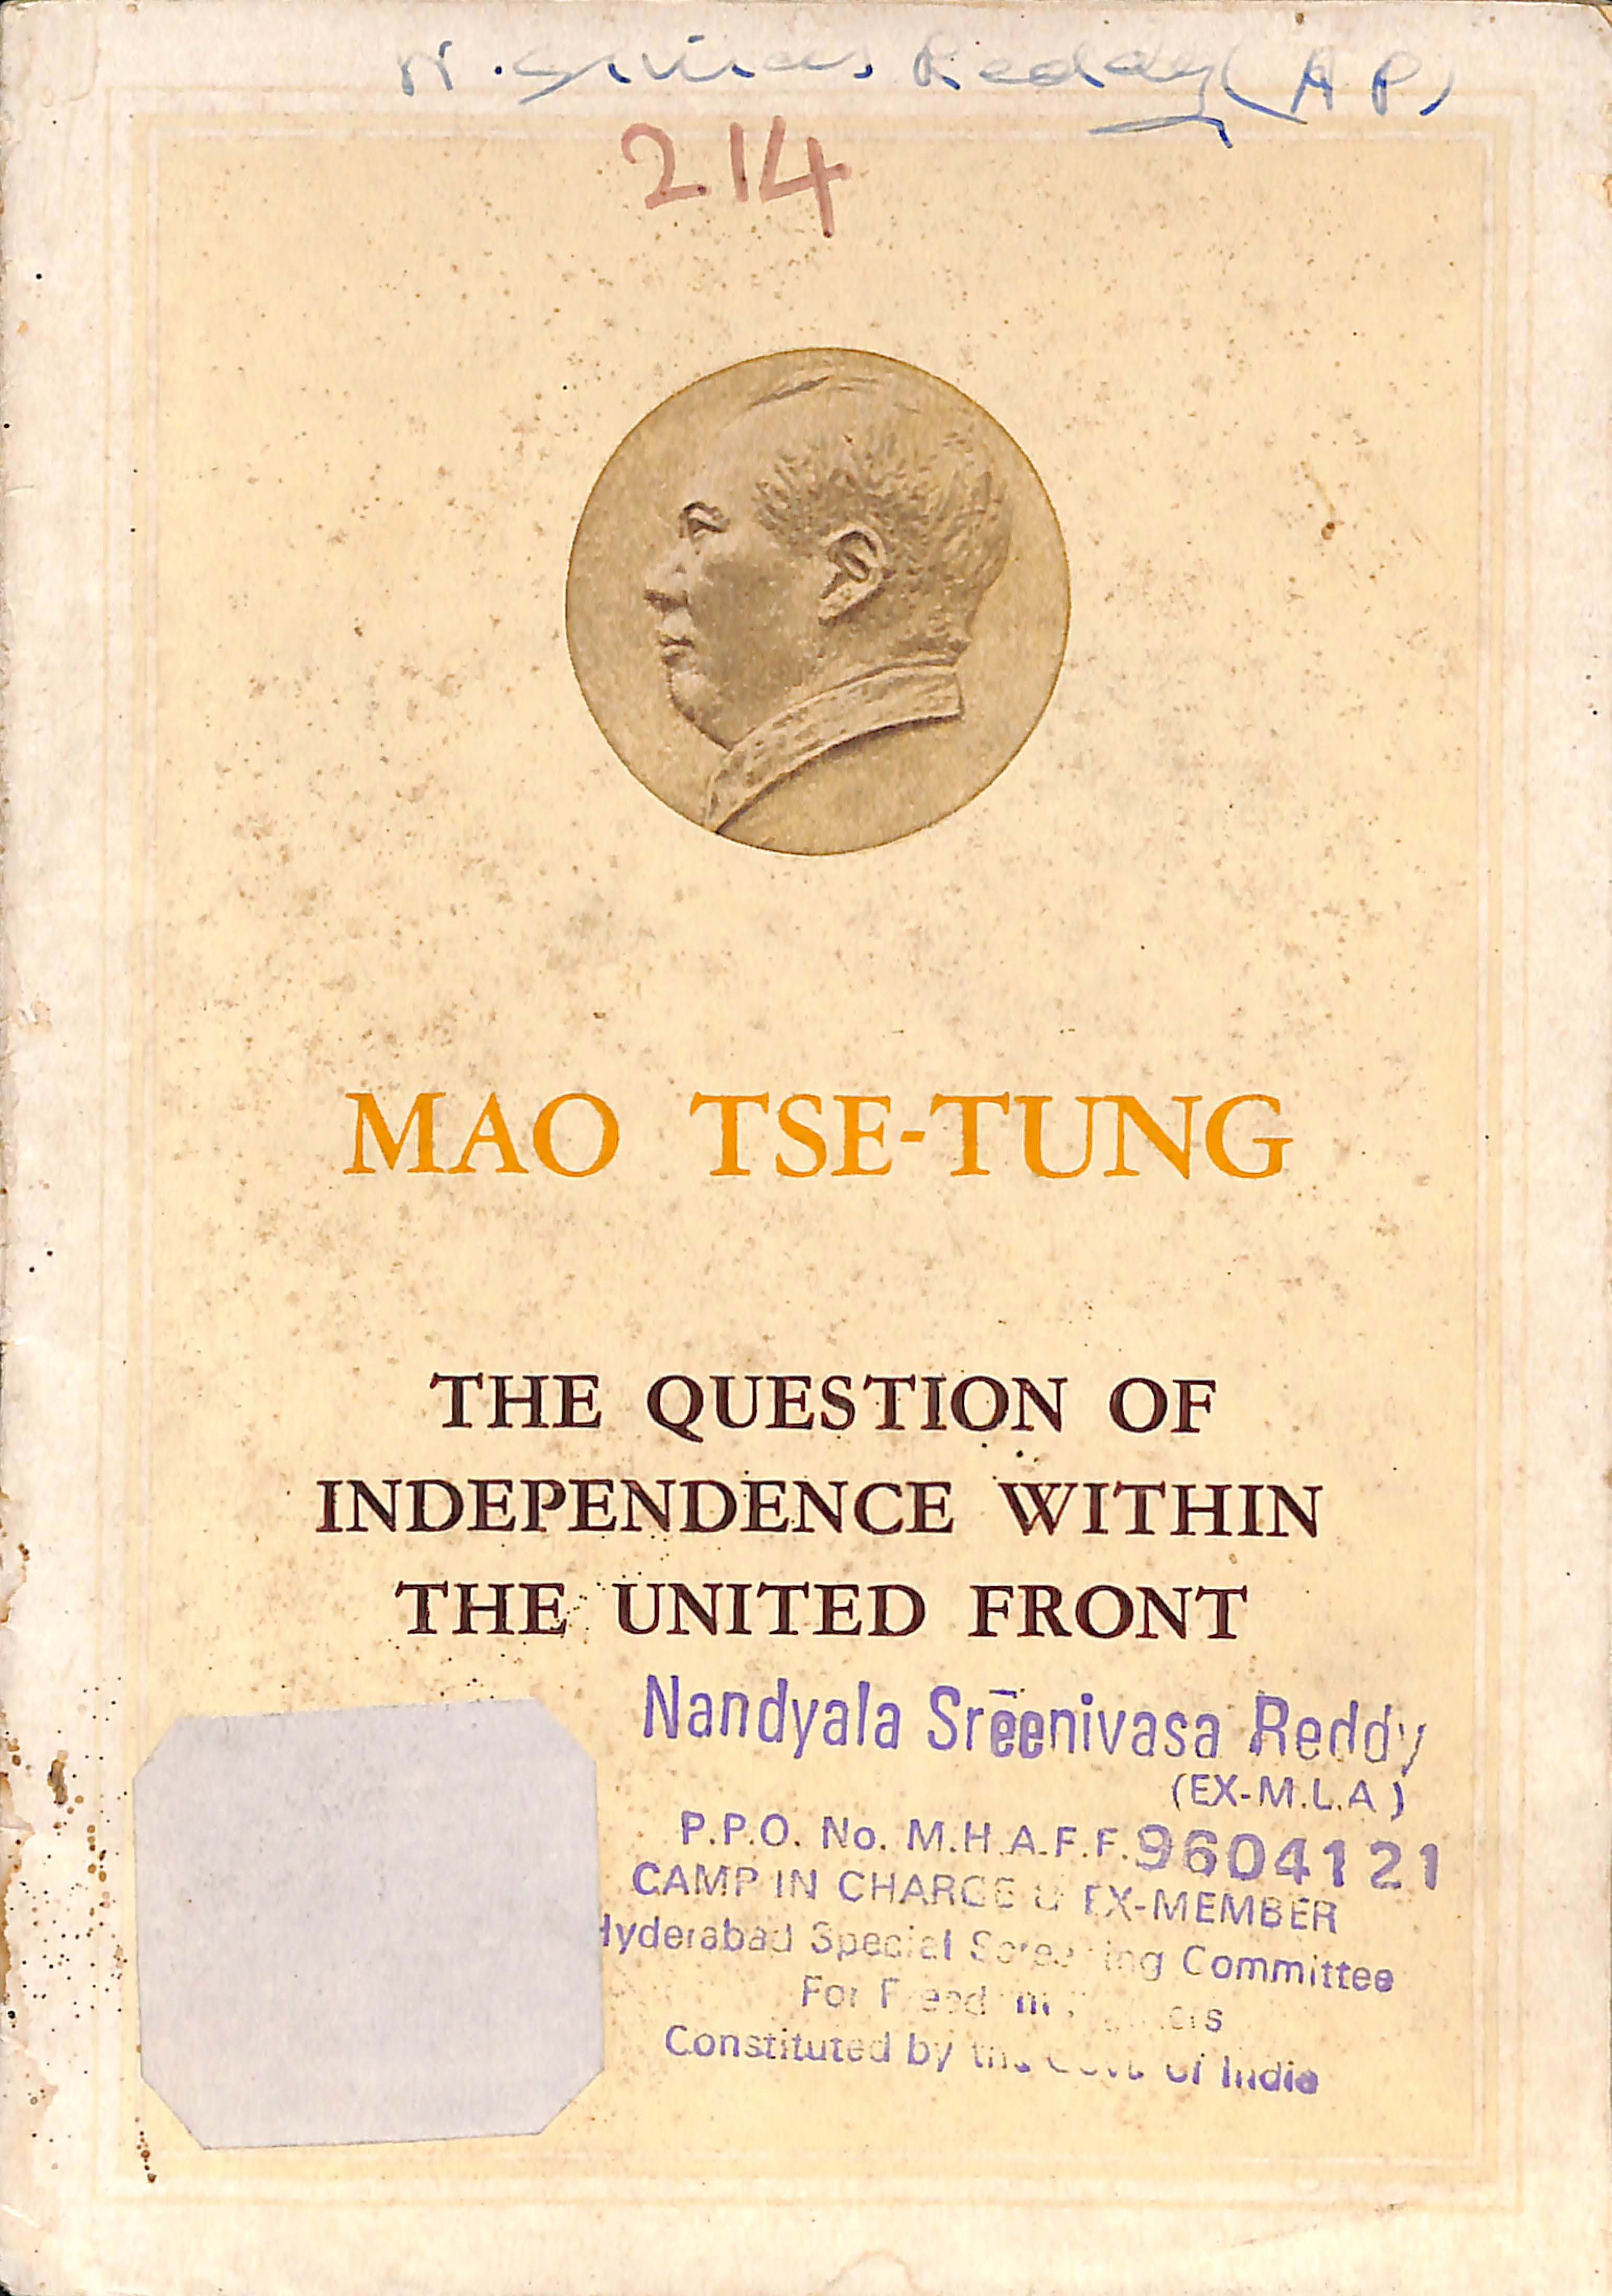 The question of independence and outonomy within the united front (MAO TSE-TUNG)